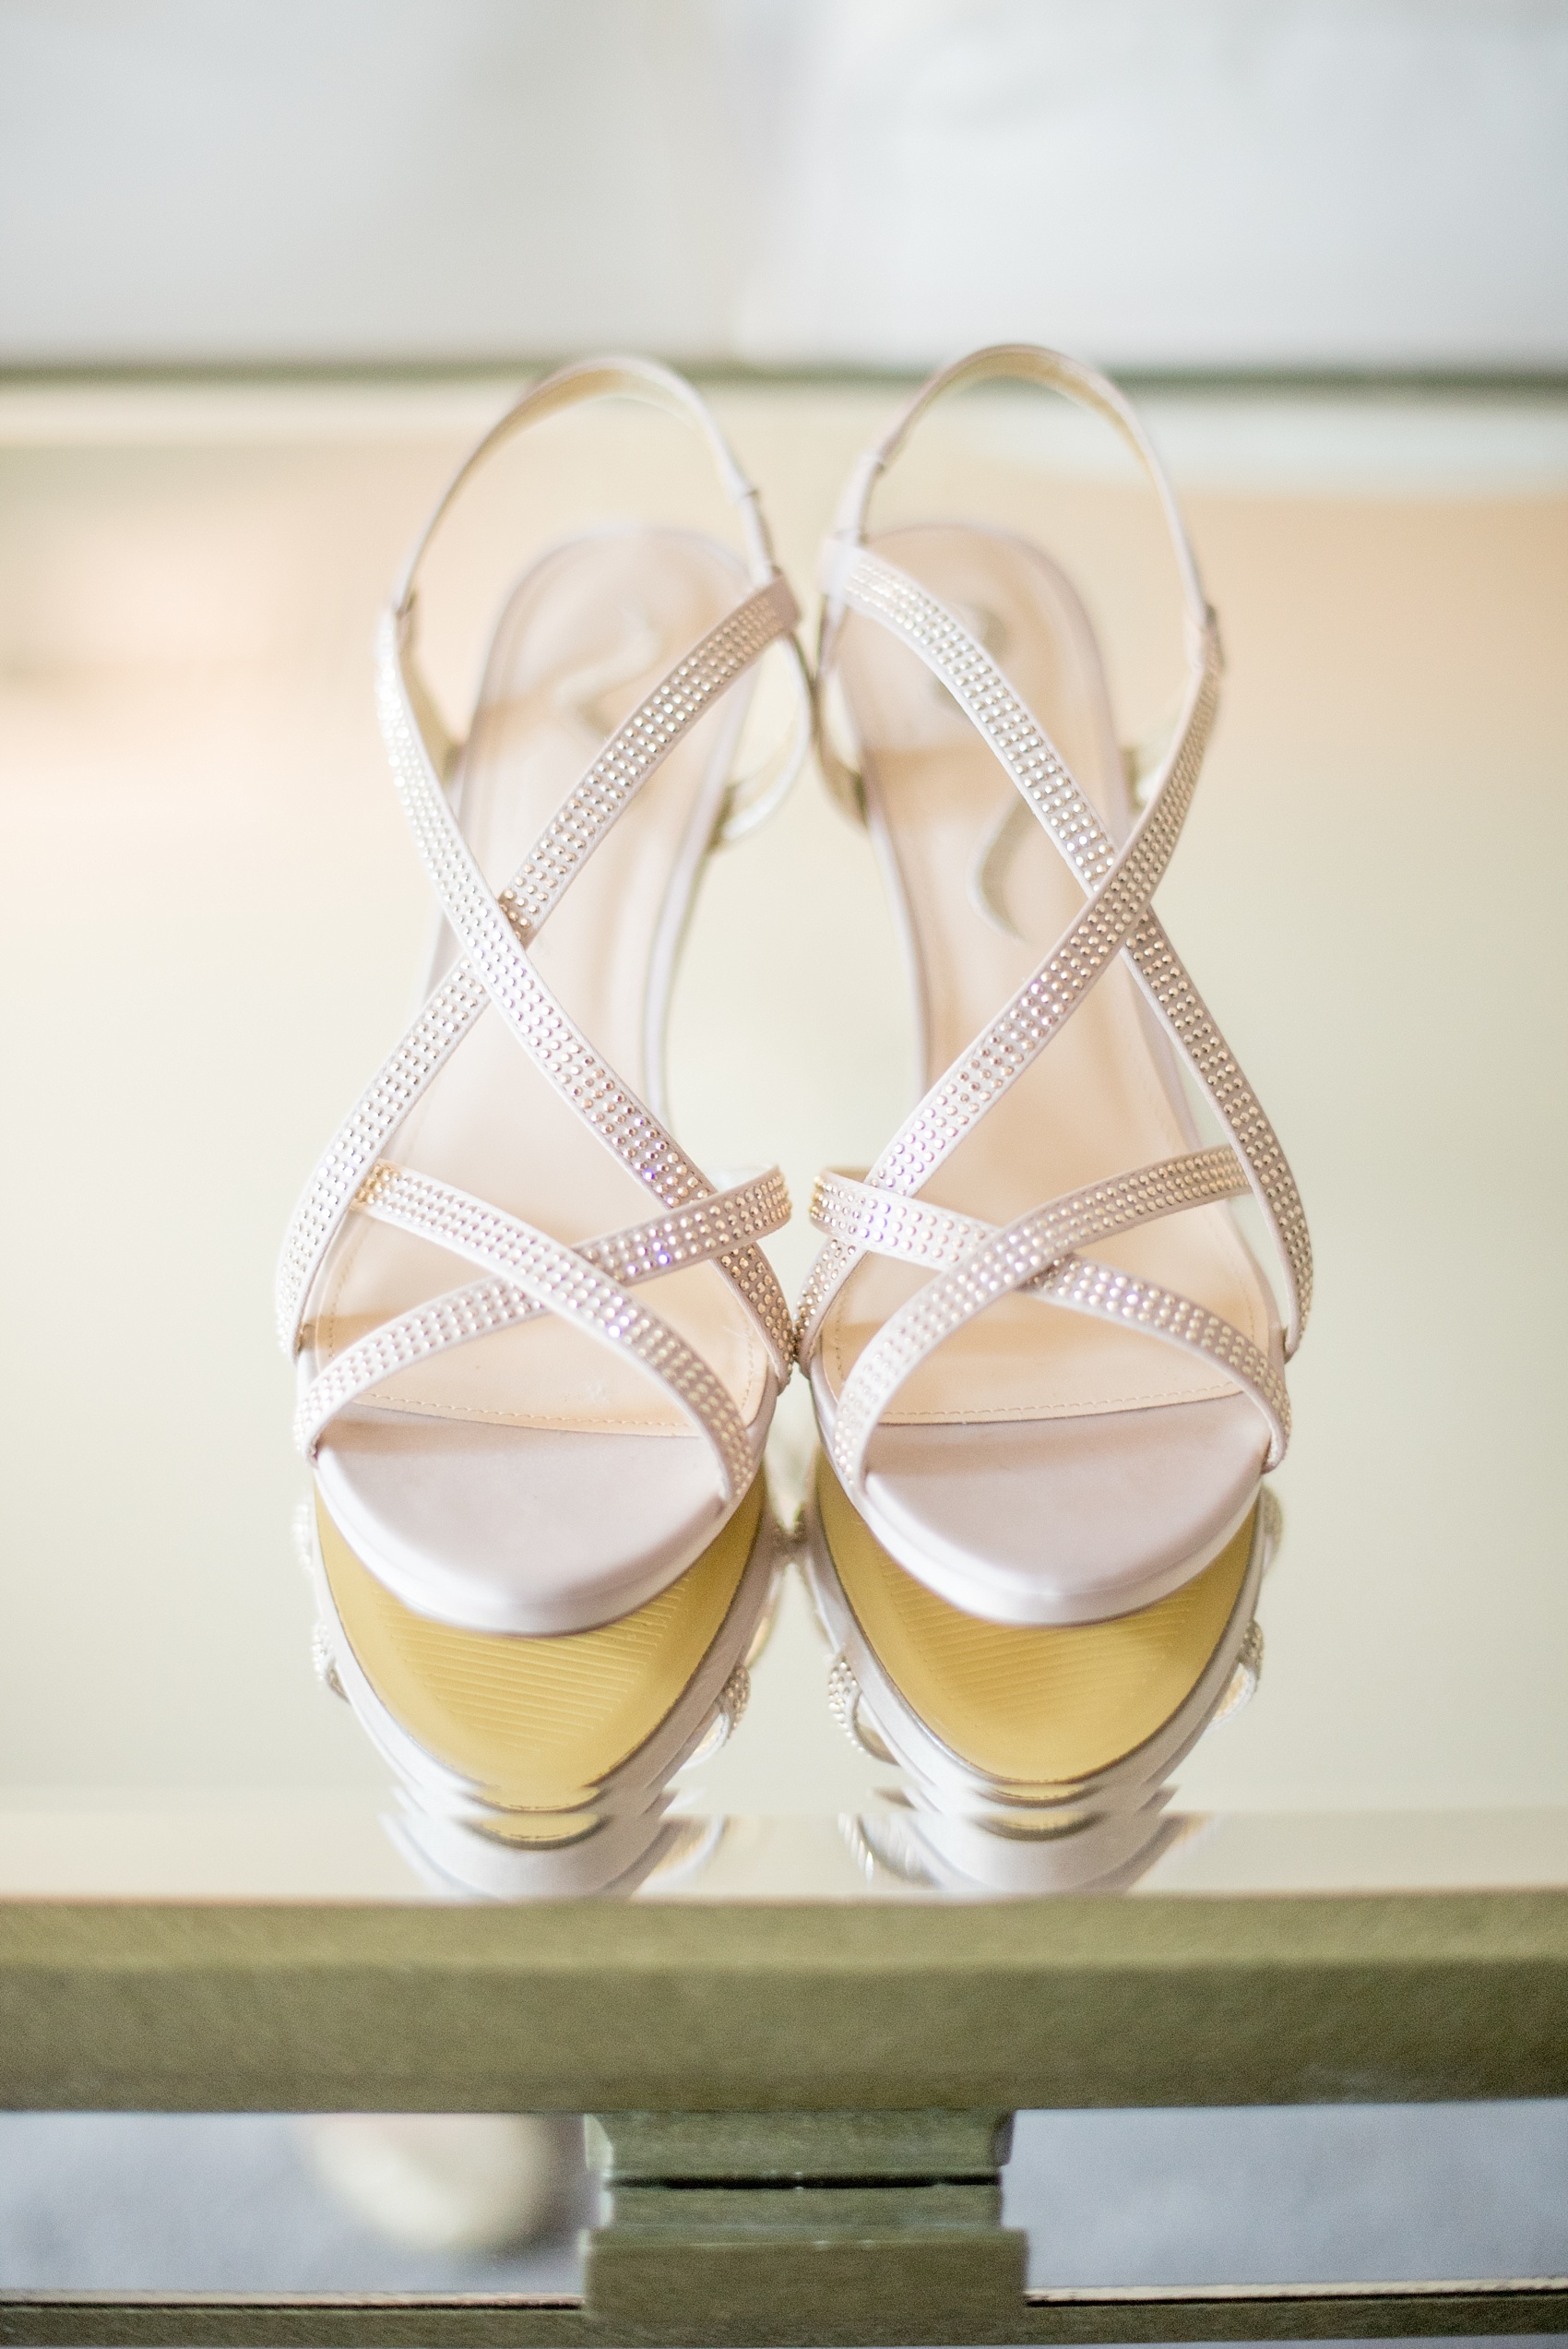 Mikkel Paige Photography detail shoe photo for a 214 Martin Street downtown Raleigh wedding.